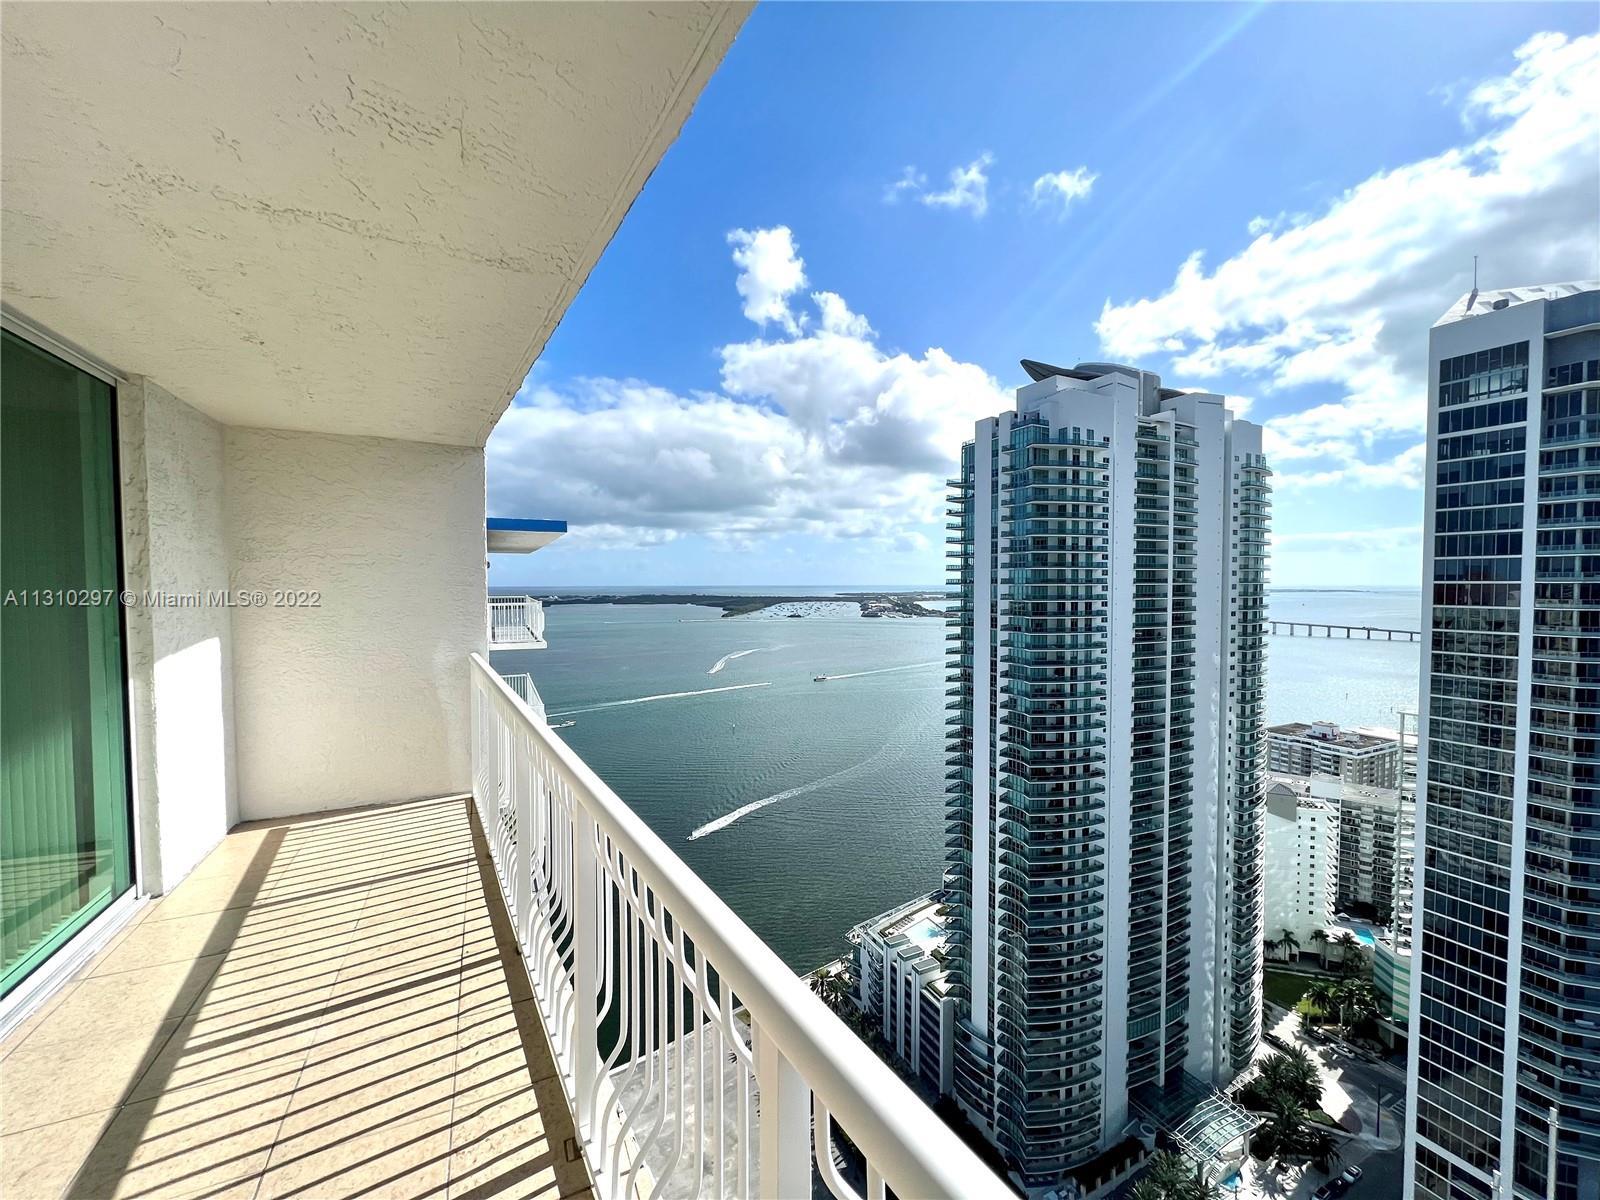 Spectacular  views from this updated 1/1 in sought after Brickell bay neighborhood.  Steps to the he